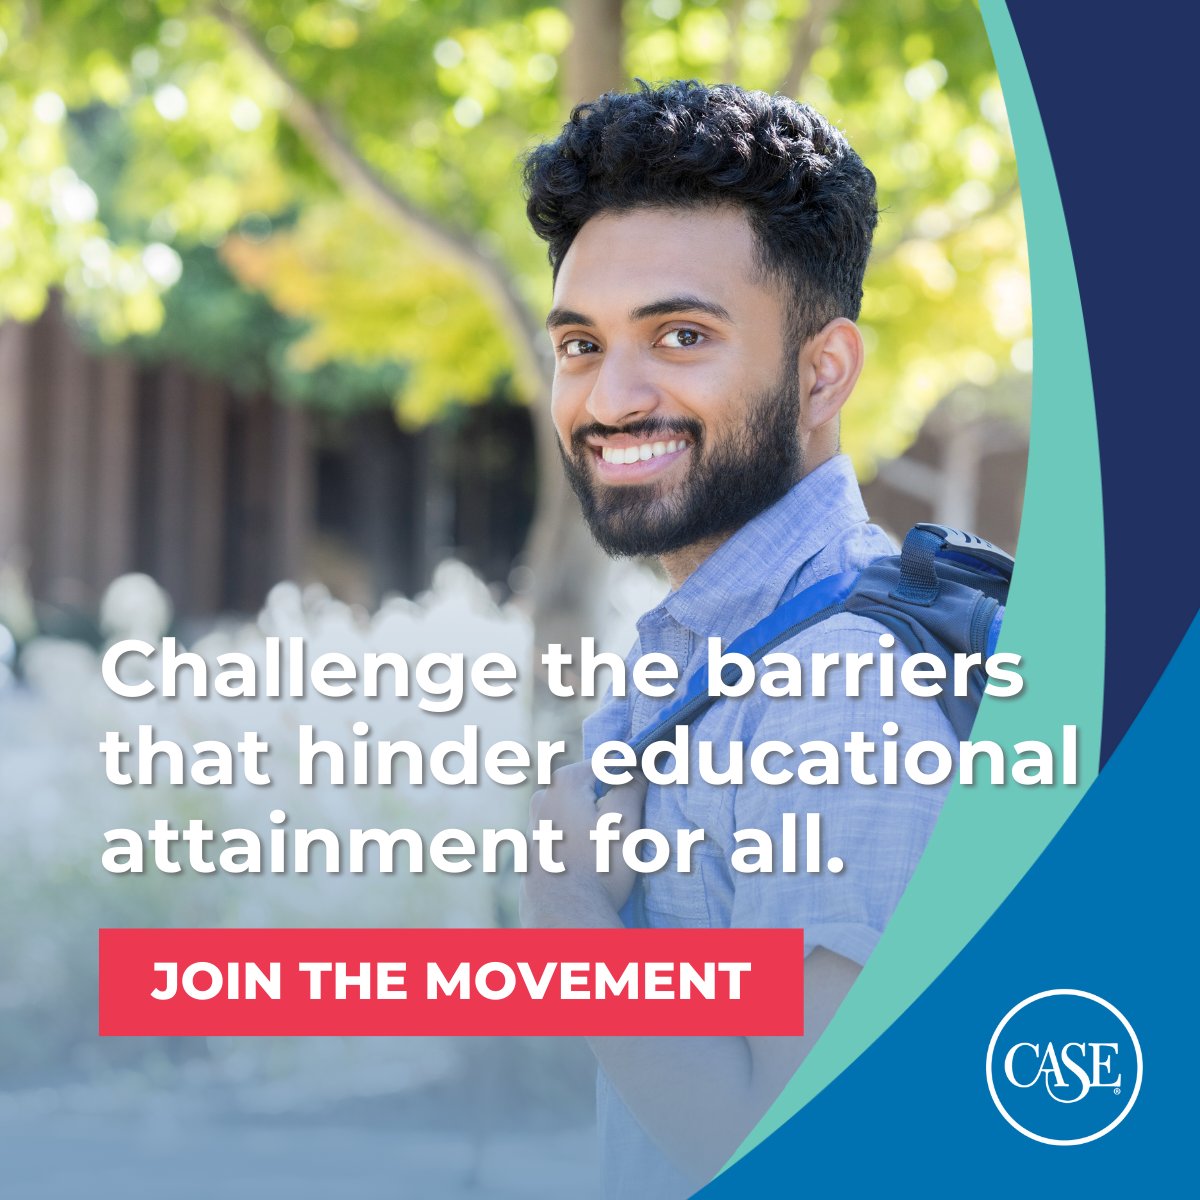 The CASE Opportunity and Inclusion Center™ is building a global network of scholars, advancement experts, and advocates who are working to challenge the barriers that hinder educational attainment for all. Be part of the movement: hubs.ly/Q027j5hx0